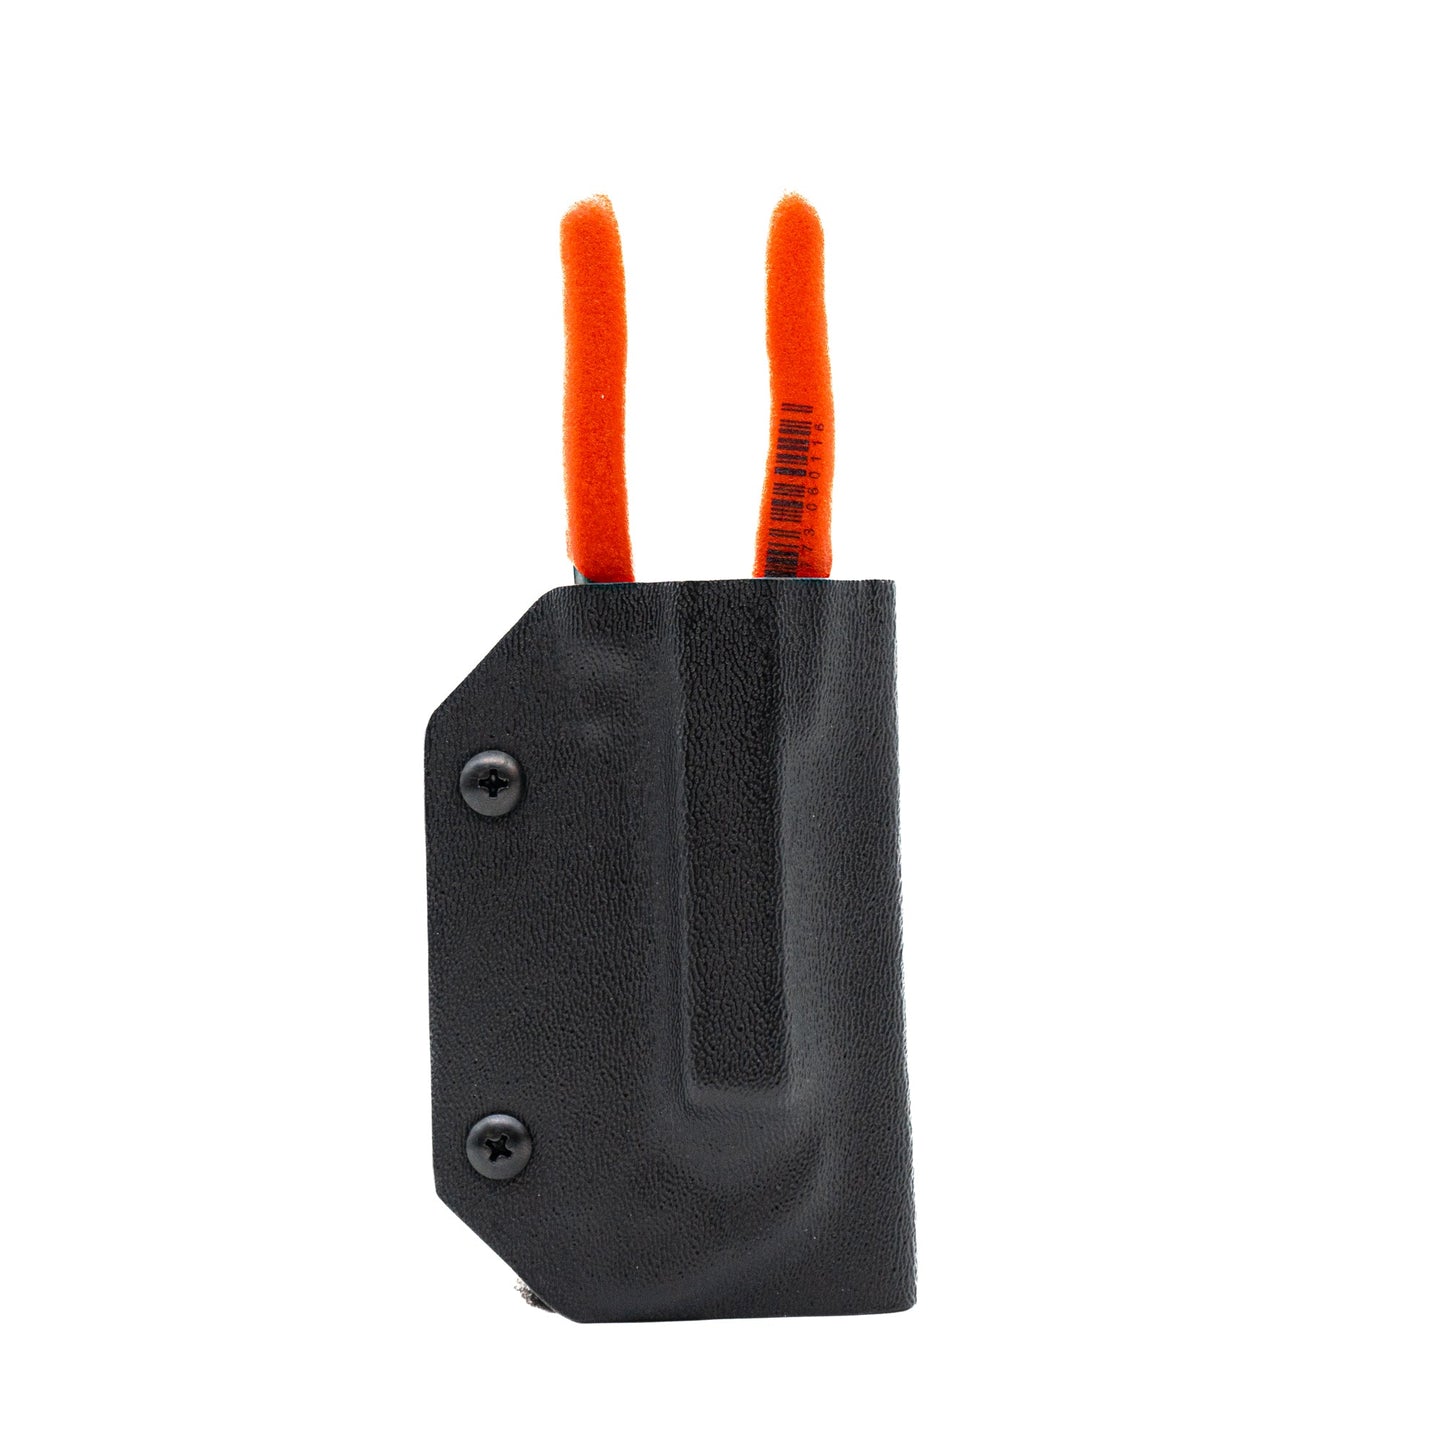 Kydex Sheath for the Knipex Cobra 150 Pliers Clip & Carry